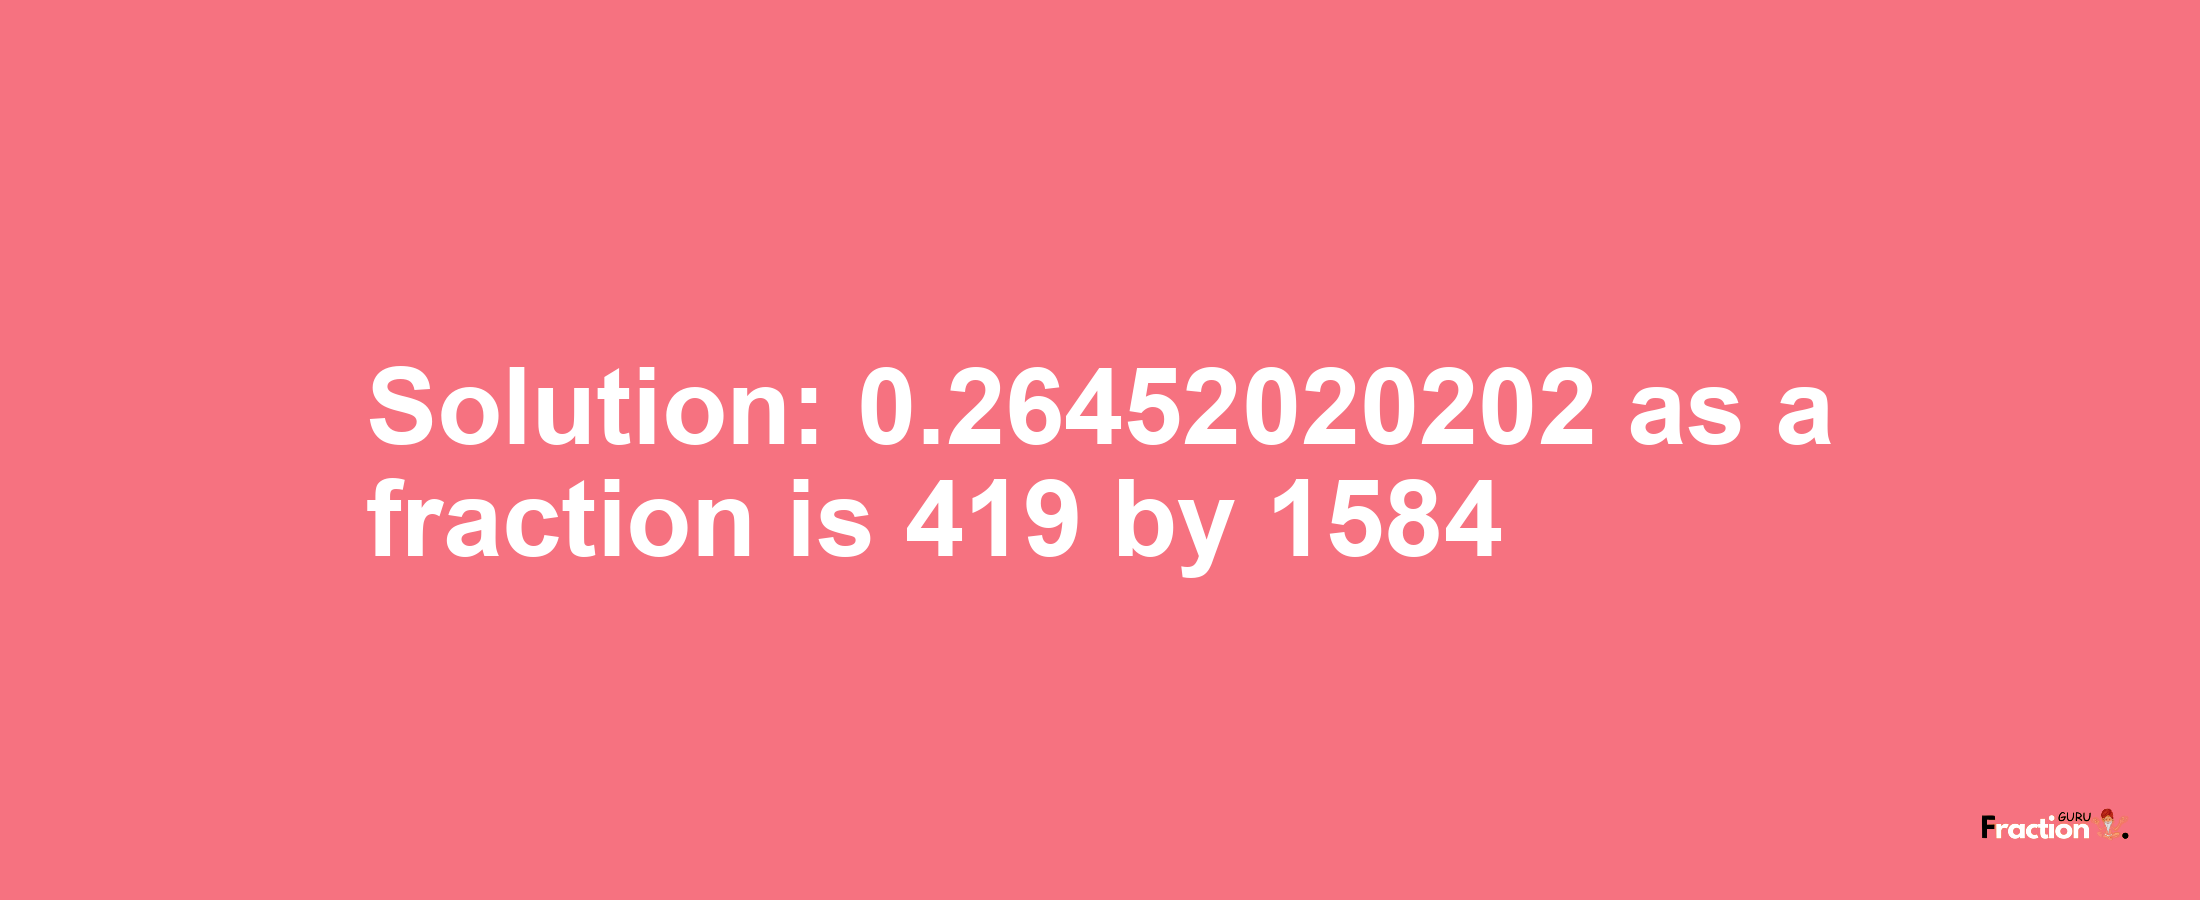 Solution:0.26452020202 as a fraction is 419/1584